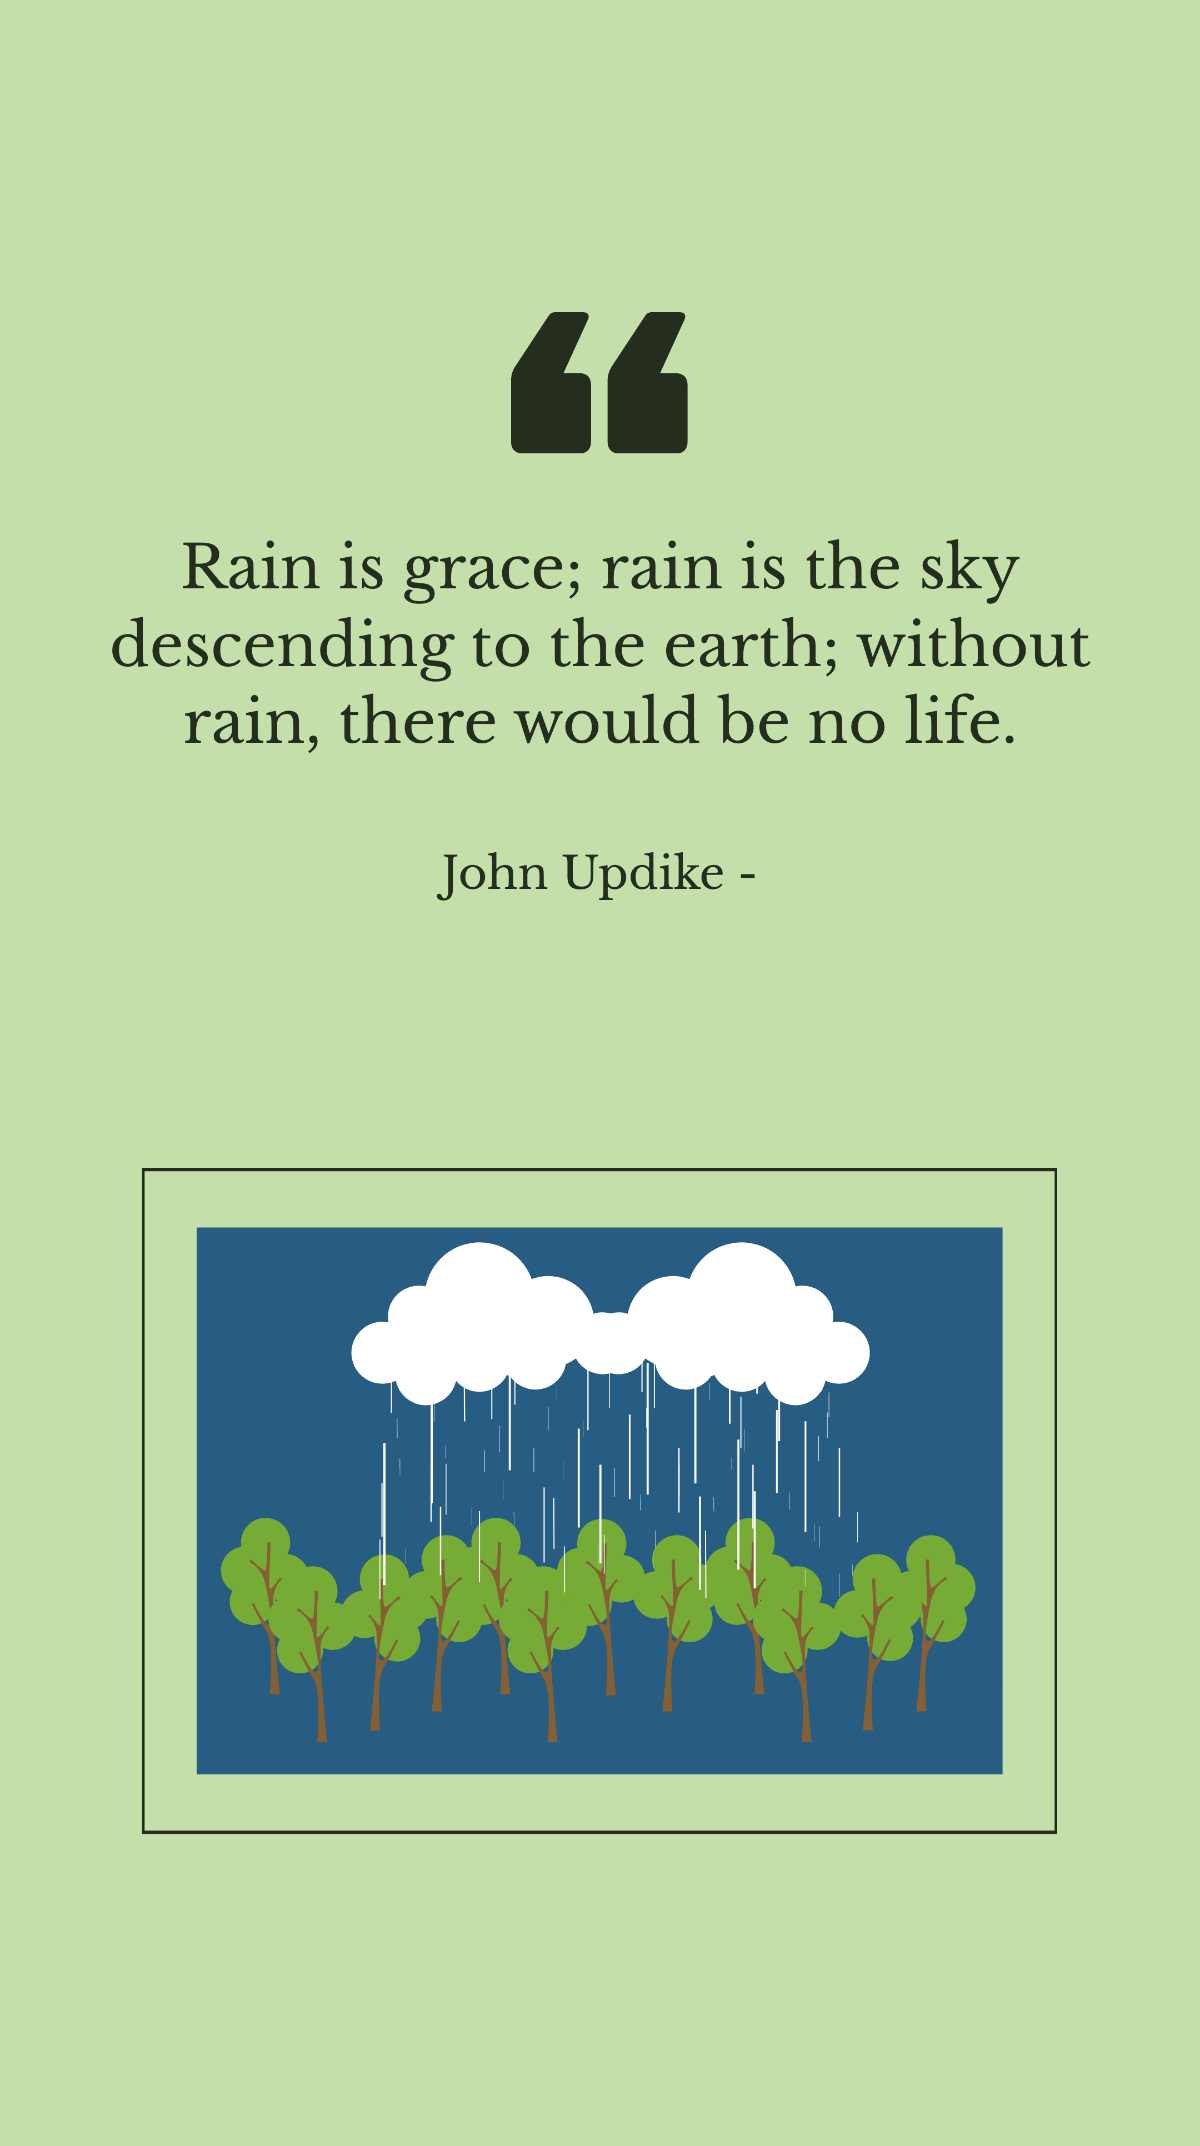 John Updike - Rain is grace; rain is the sky descending to the earth; without rain, there would be no life.